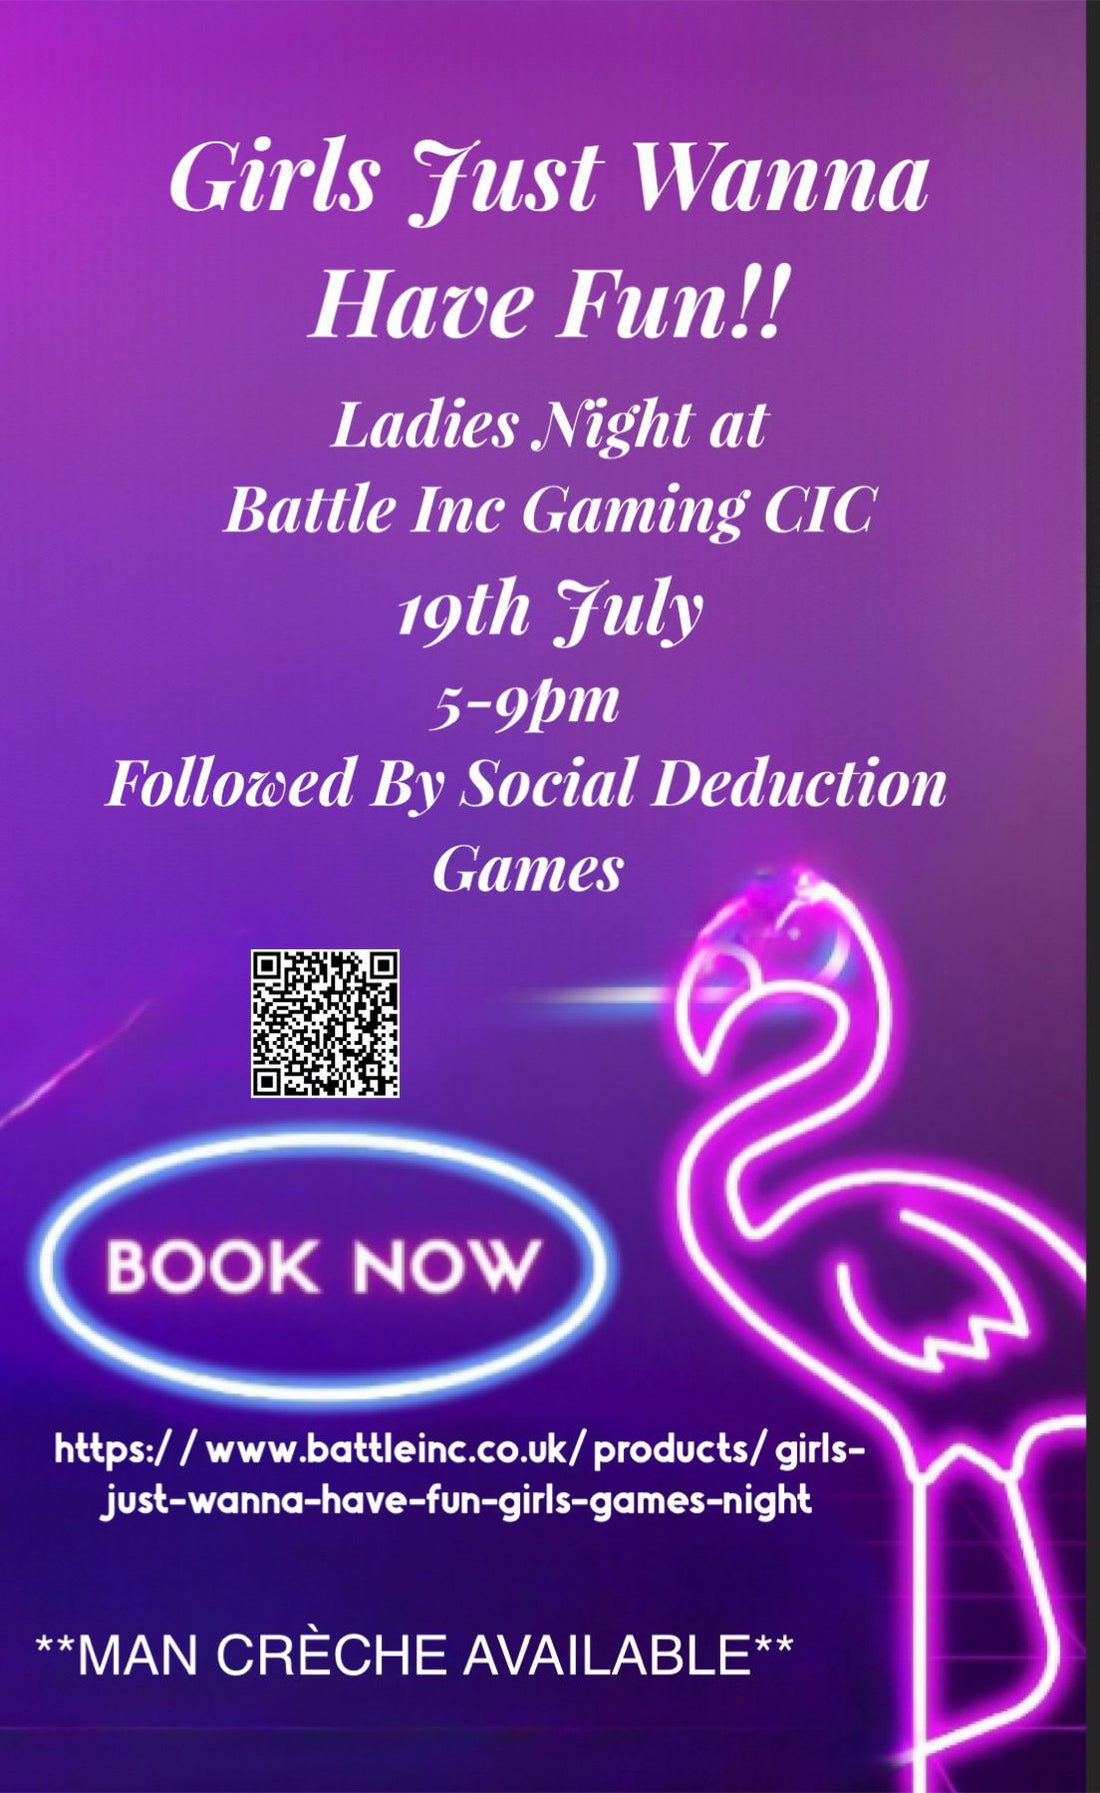 Girls Just Wanna Have Fun! Friday 19th July 5pm-9pm